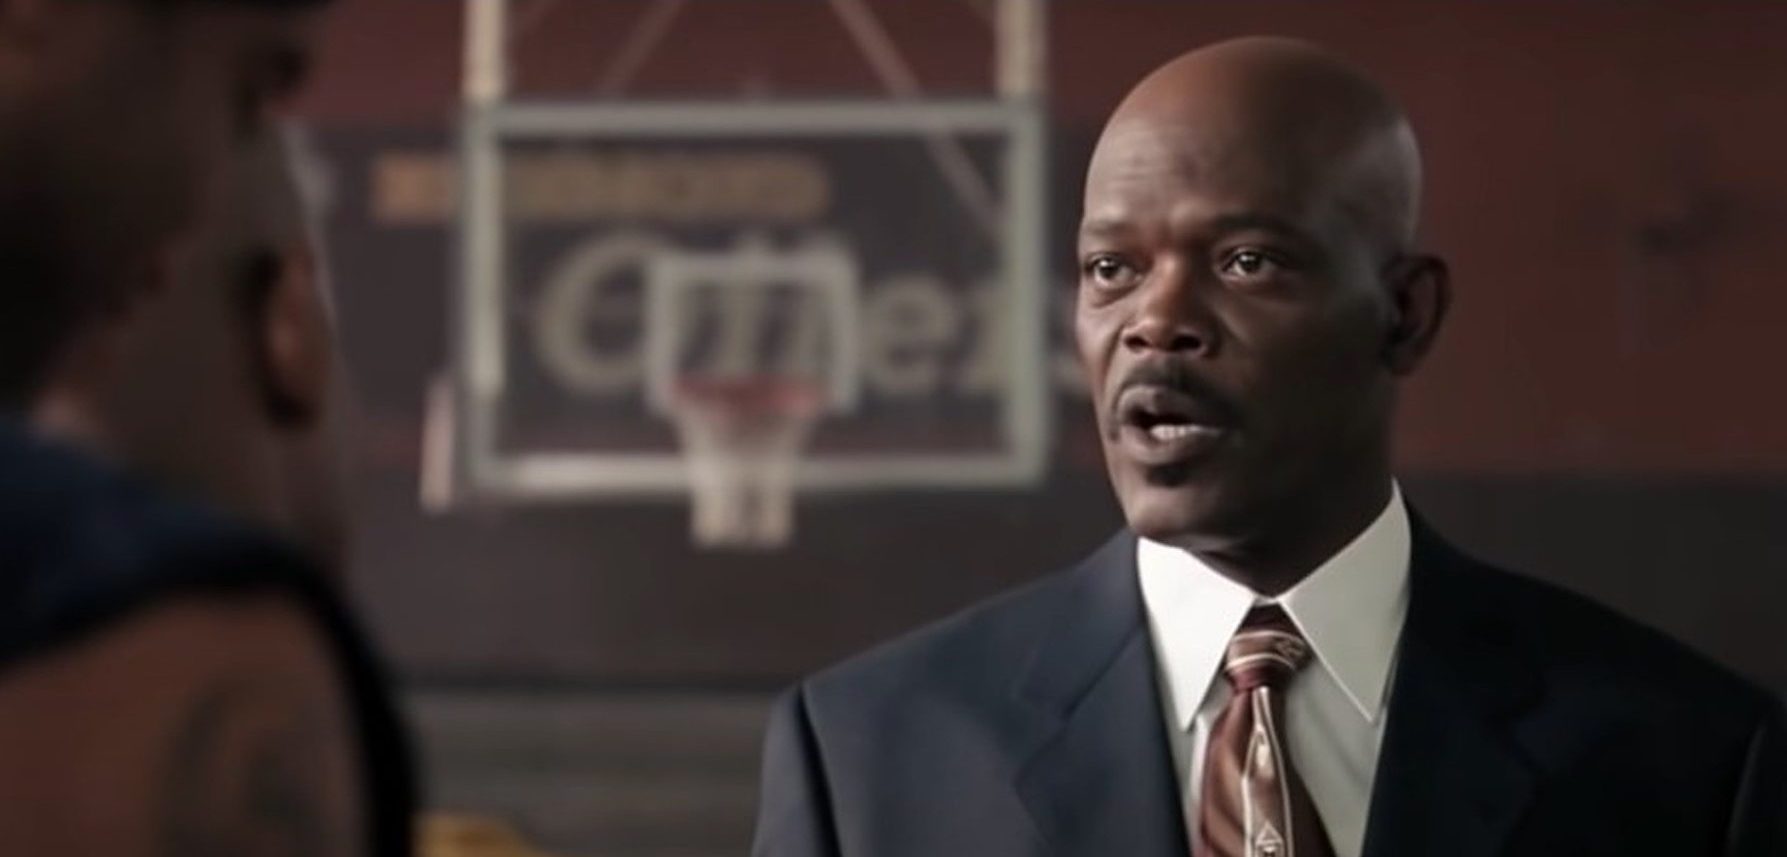 Is Coach Carter a True Story? Is the Movie Based on Kenny Ray Carter?